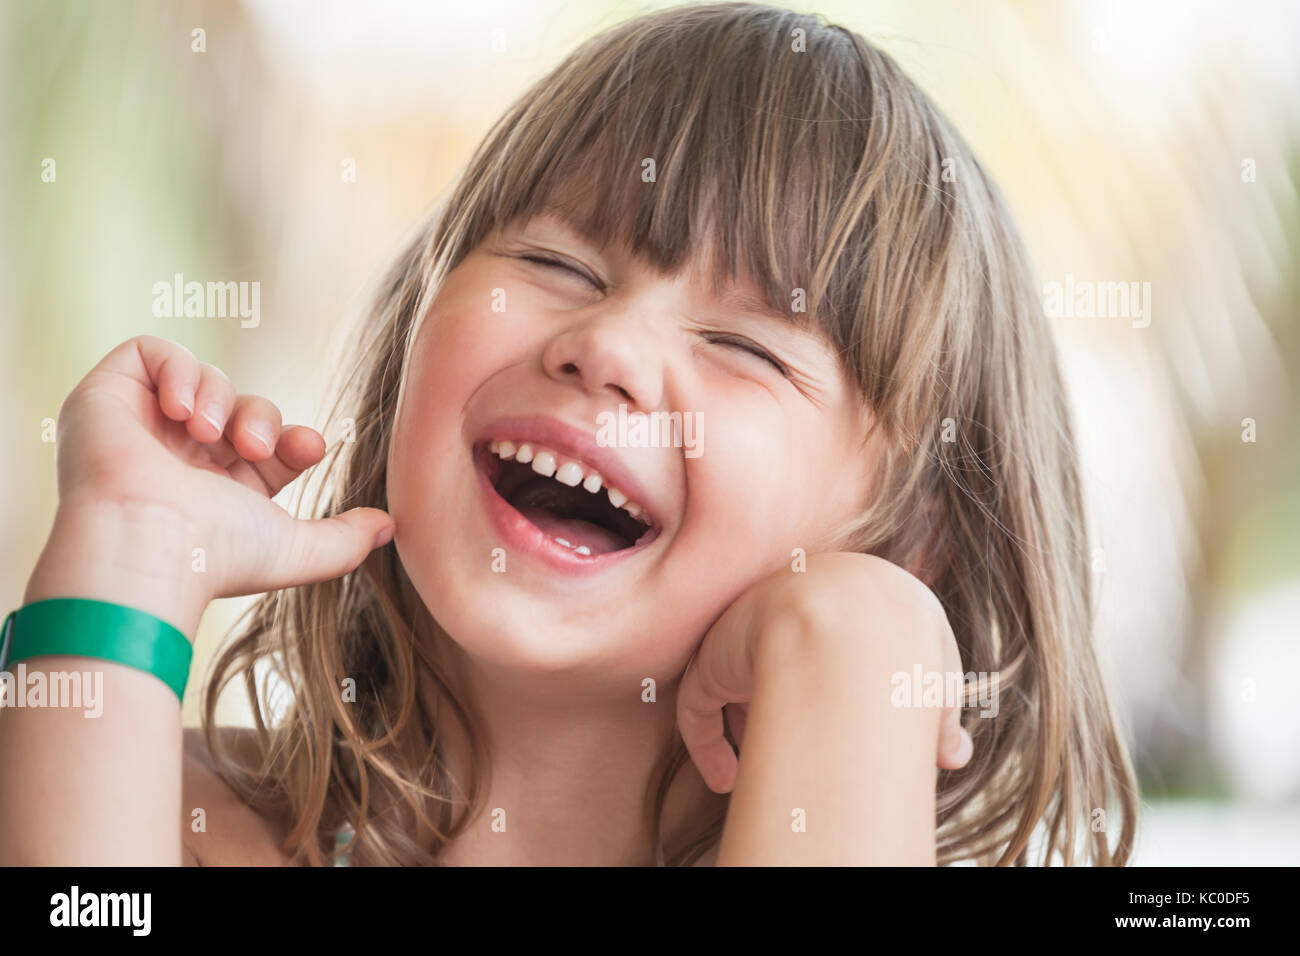 Laughing Blond Caucasian little girl, close-up outdoor face portrait Stock Photo